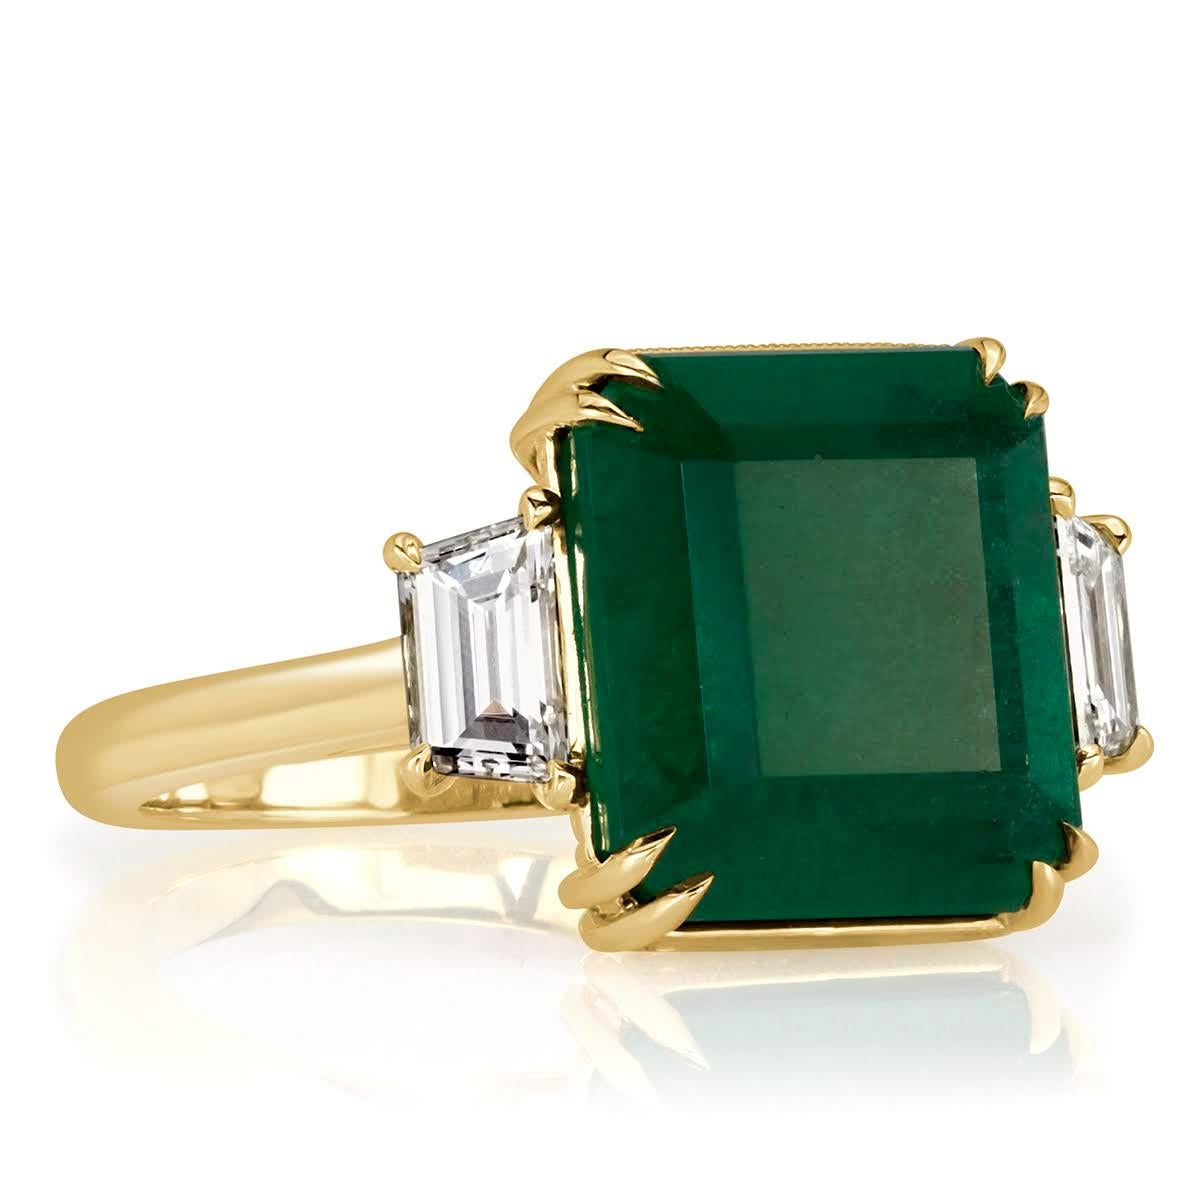 Custom created in 18k yellow gold, this gorgeous emerald and diamond ring showcases a stunning 7.86ct, GIA certified emerald center gemstone. It is secured by sharp eagle claw, double prongs and flanked by two smaller trapezoid cut diamonds on